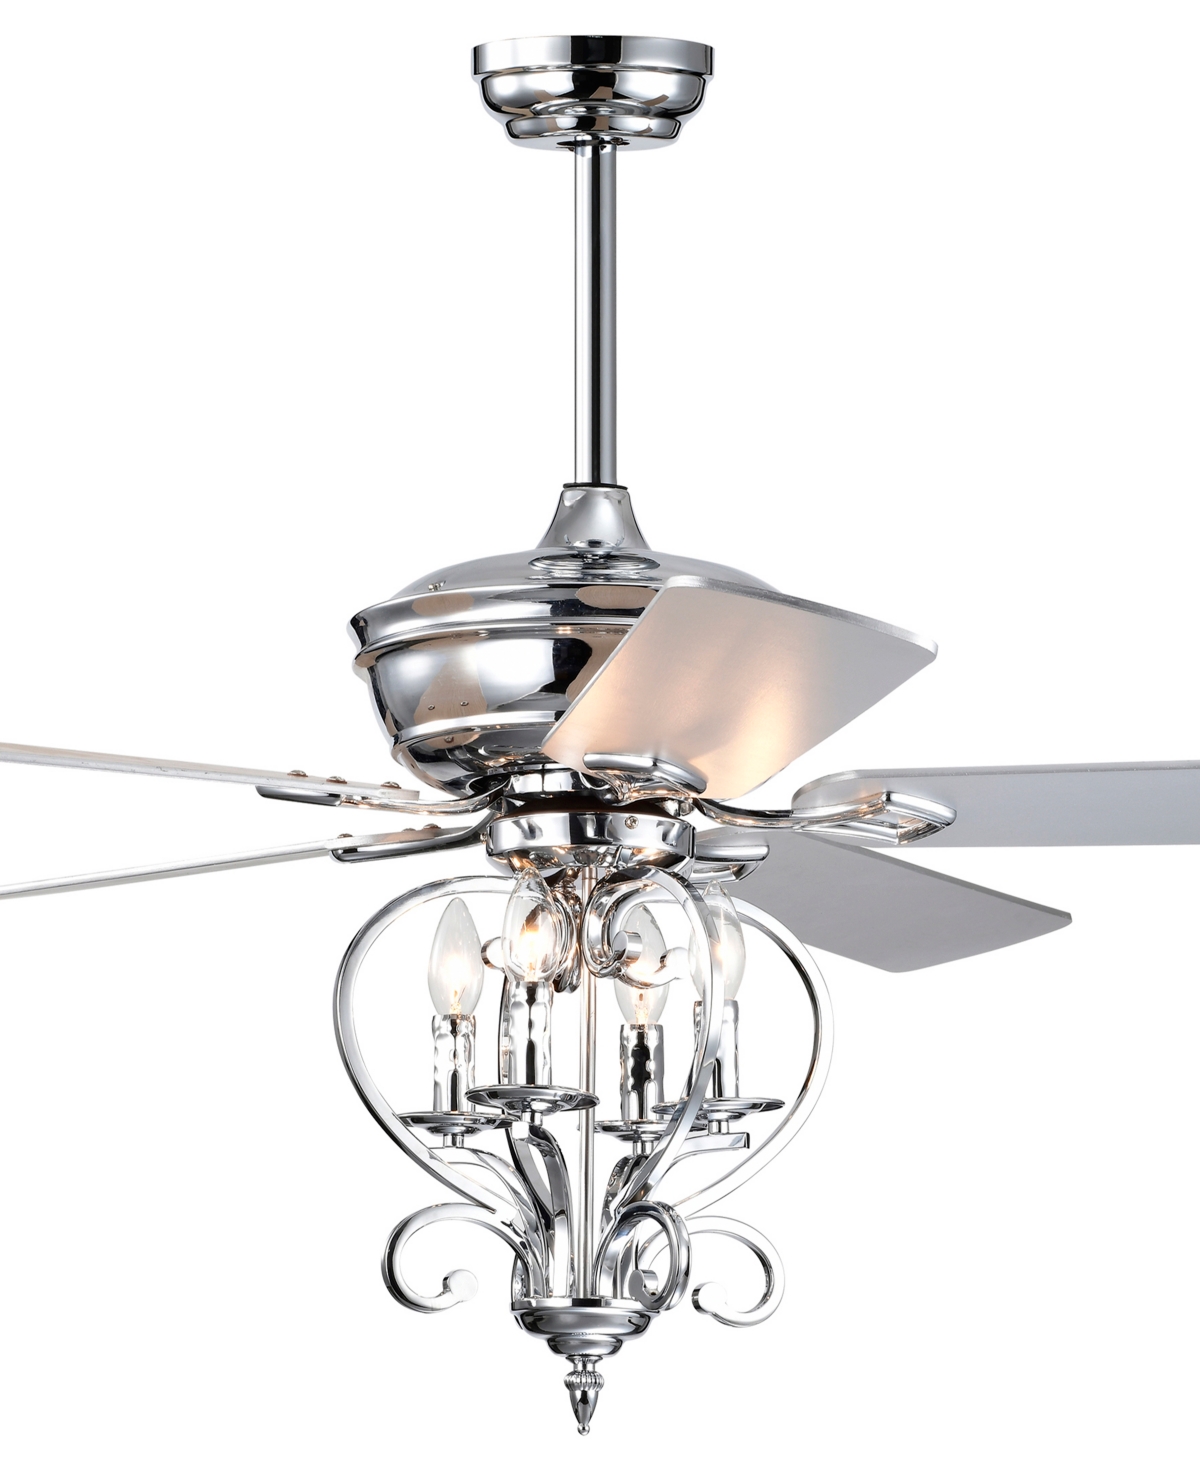 Home Accessories Kayla 52" 4-light Indoor Ceiling Fan With Light Kit In Chrome